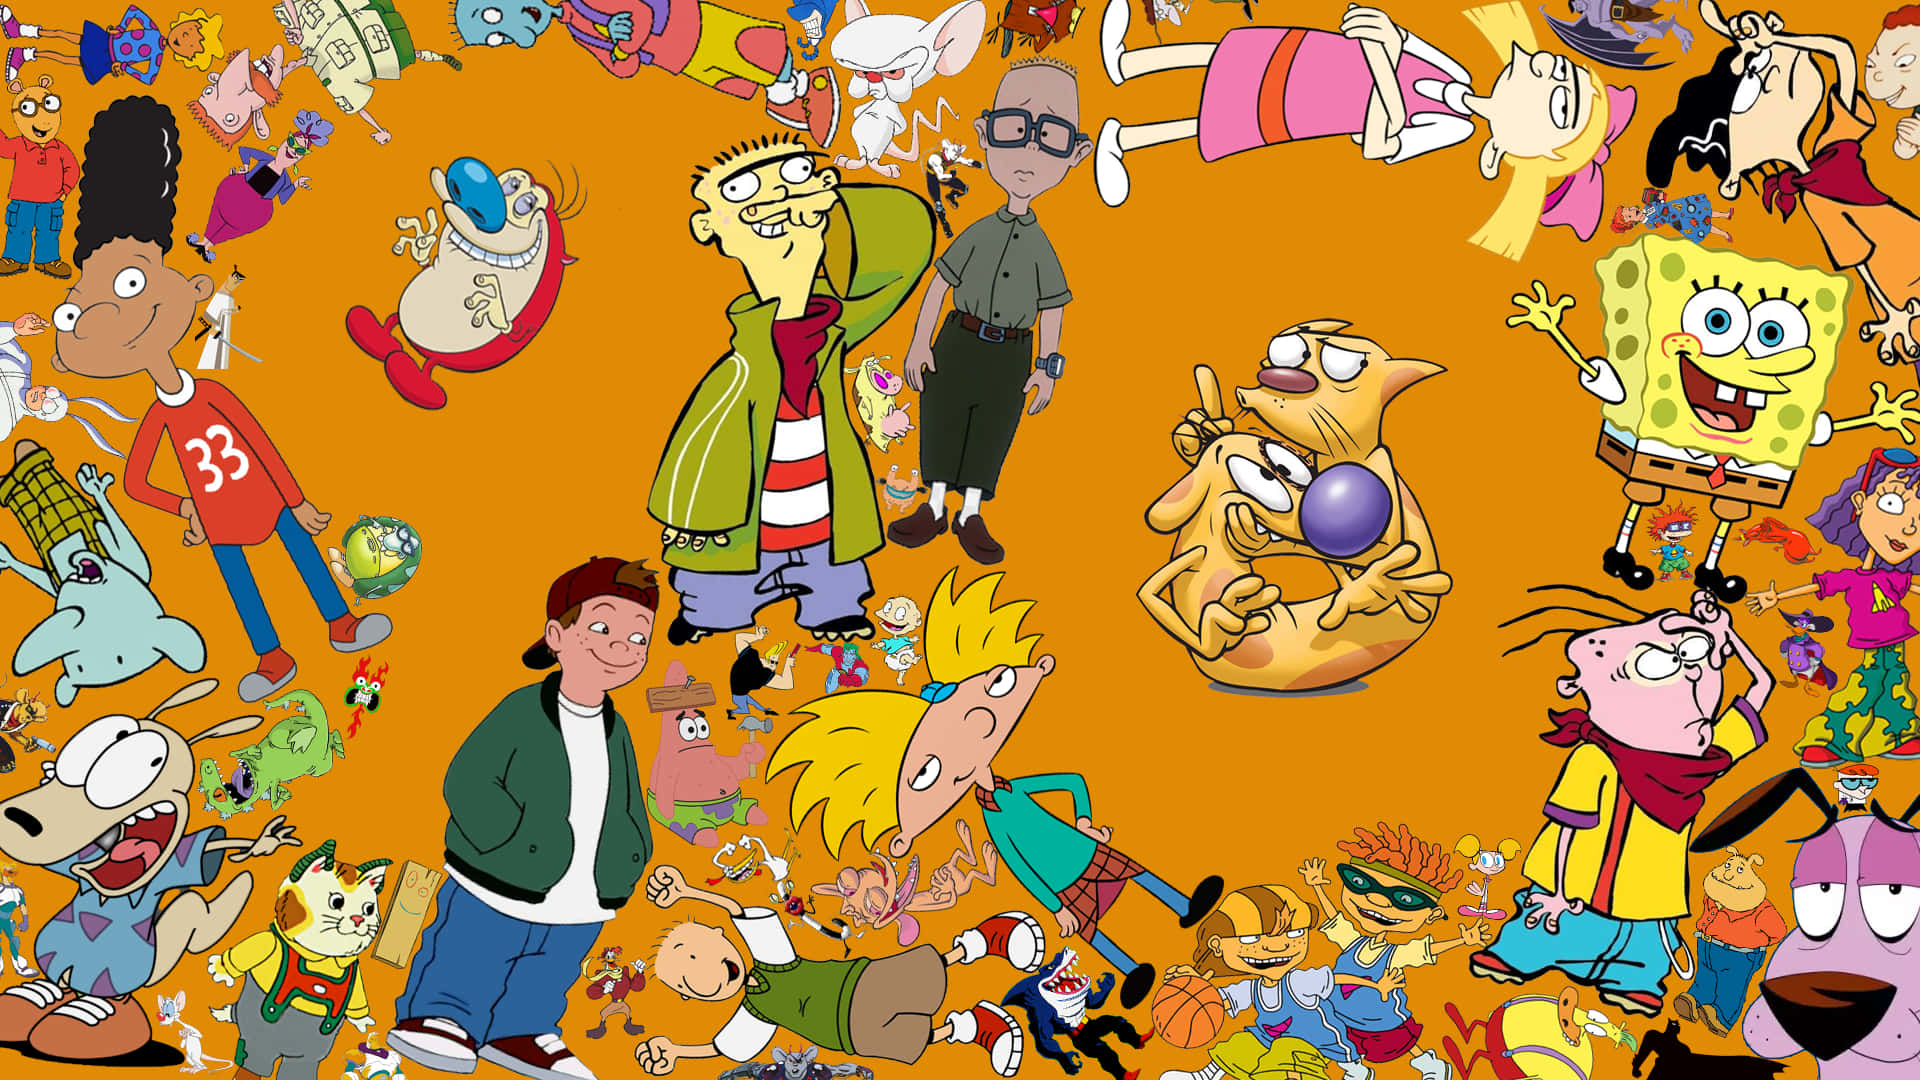 Have Fun with Your Favourite Nickelodeon Characters Wallpaper